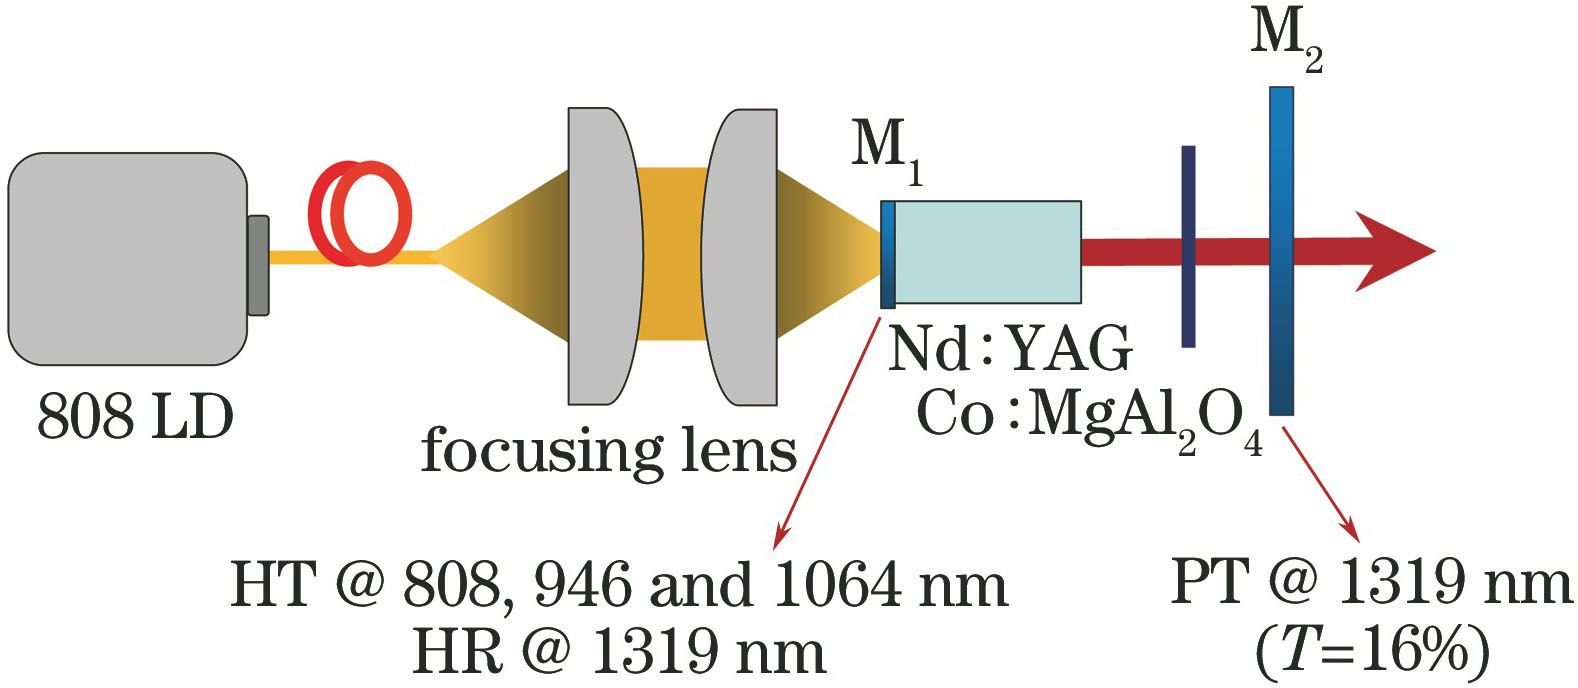 Schematic of 1319 nm Nd∶YAG pulsed laser